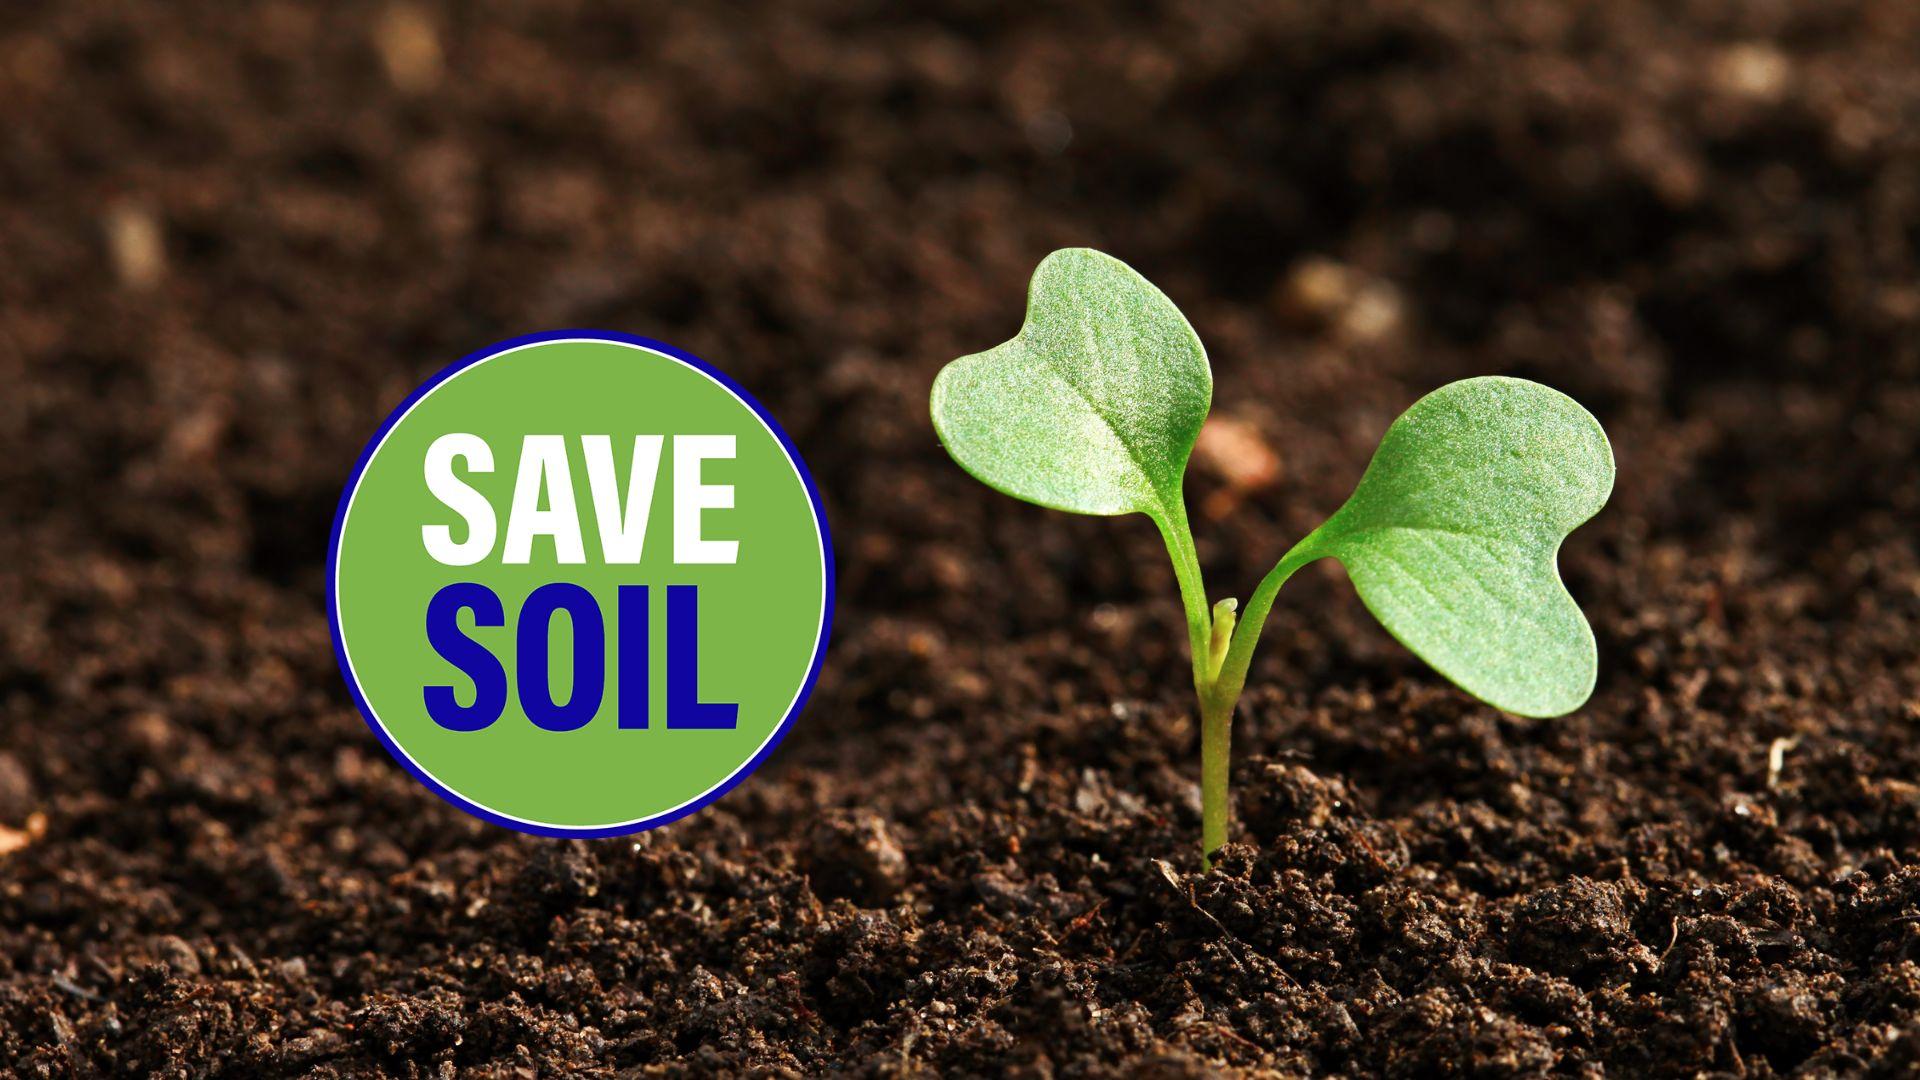 Save soil logo and small plant in dirt